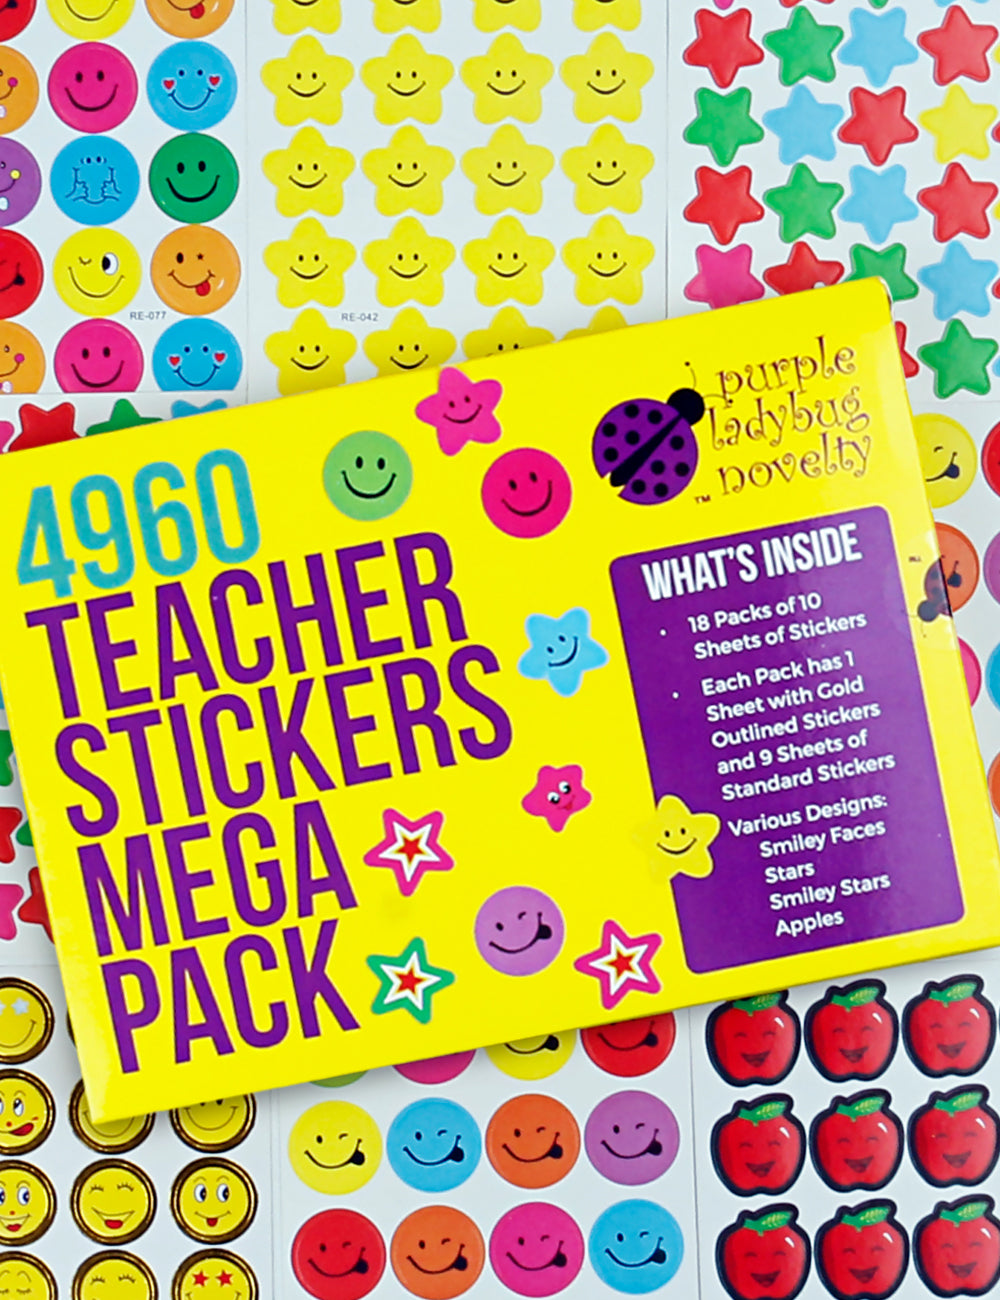 Purple Ladybug Teacher Stickers selected as Best Stickers   in the mid-range category!